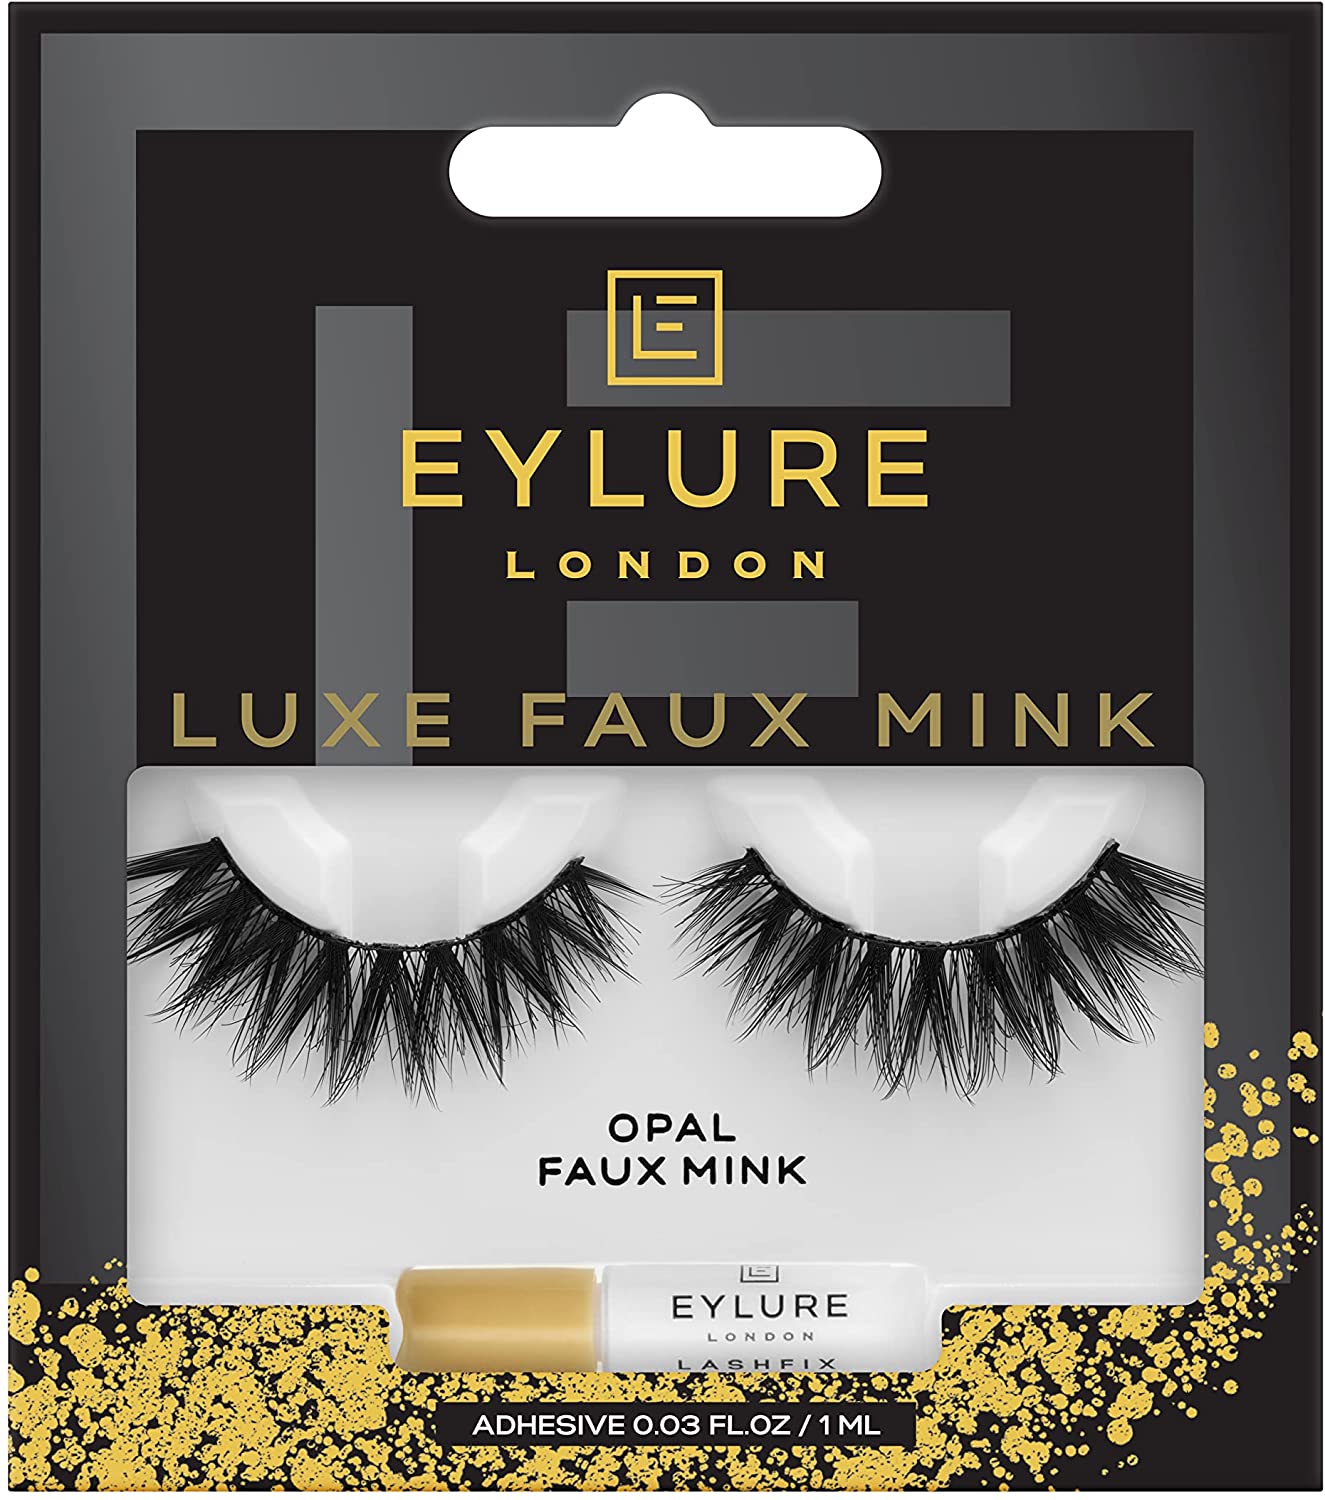 Eylure Luxe Faux Mink - Opal Lashes